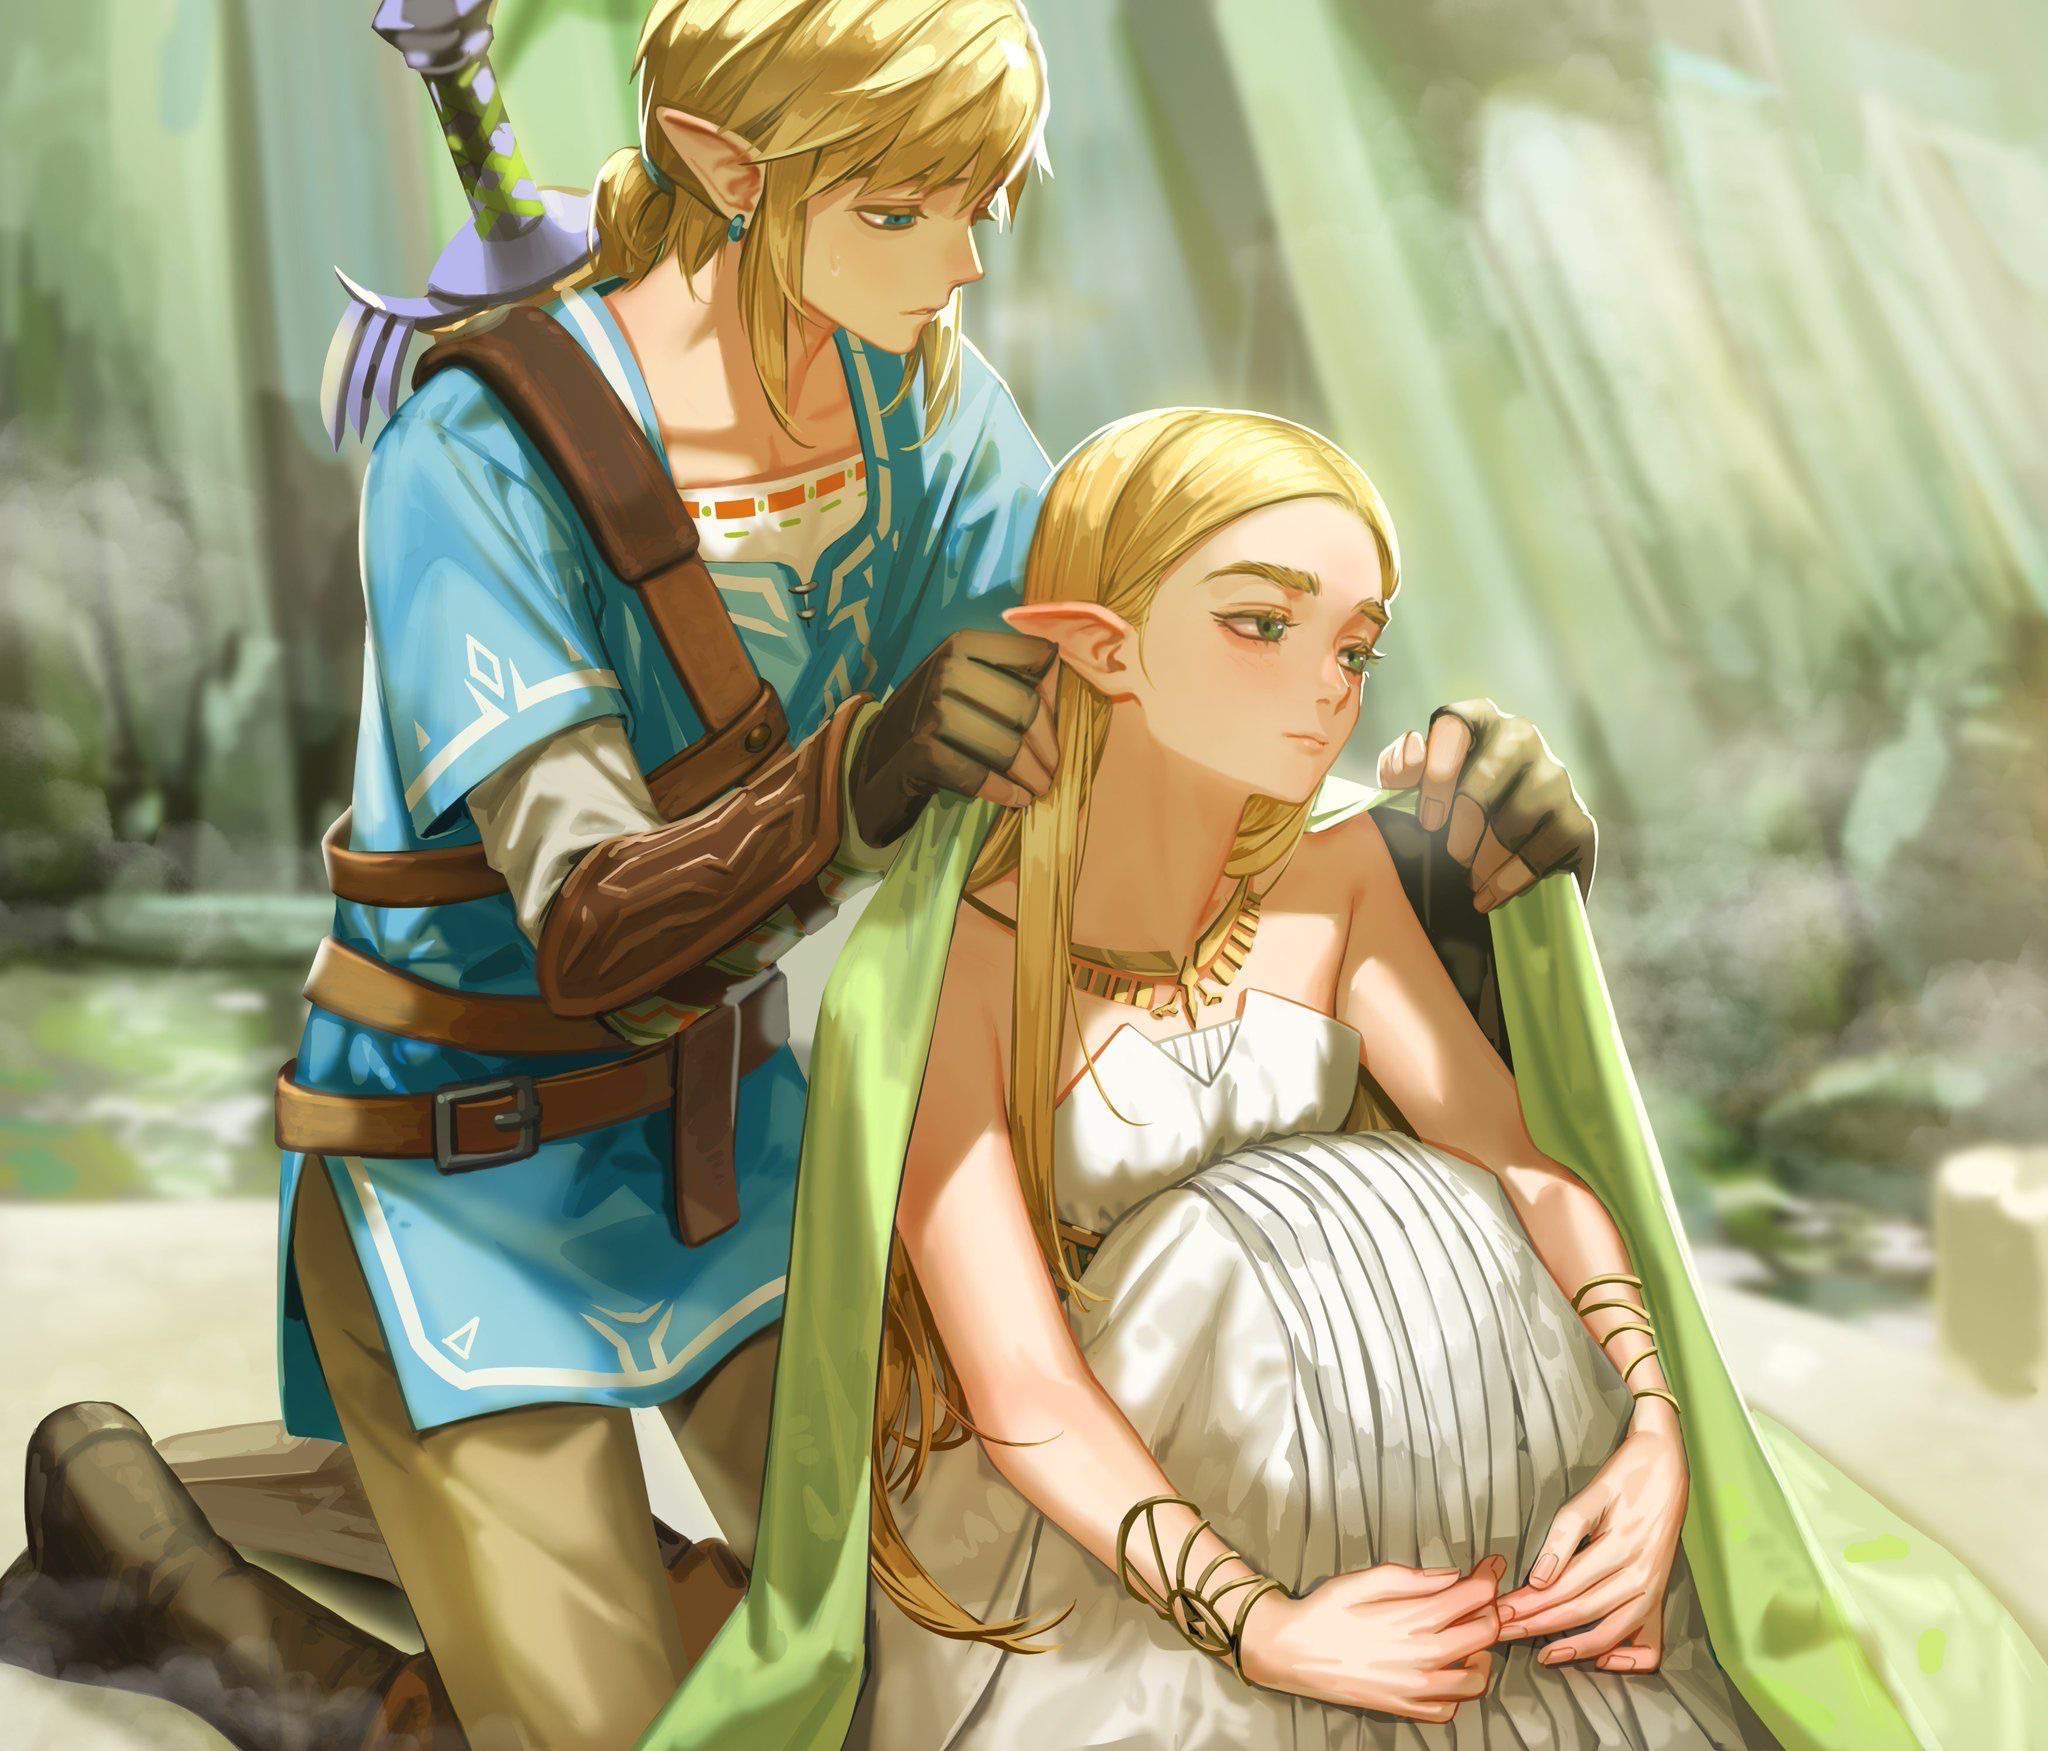 We soon be king and queen of hyrule love you link 💖💖💖💖🛡🛡🛡🛡🗡🗡🗡 Lo...